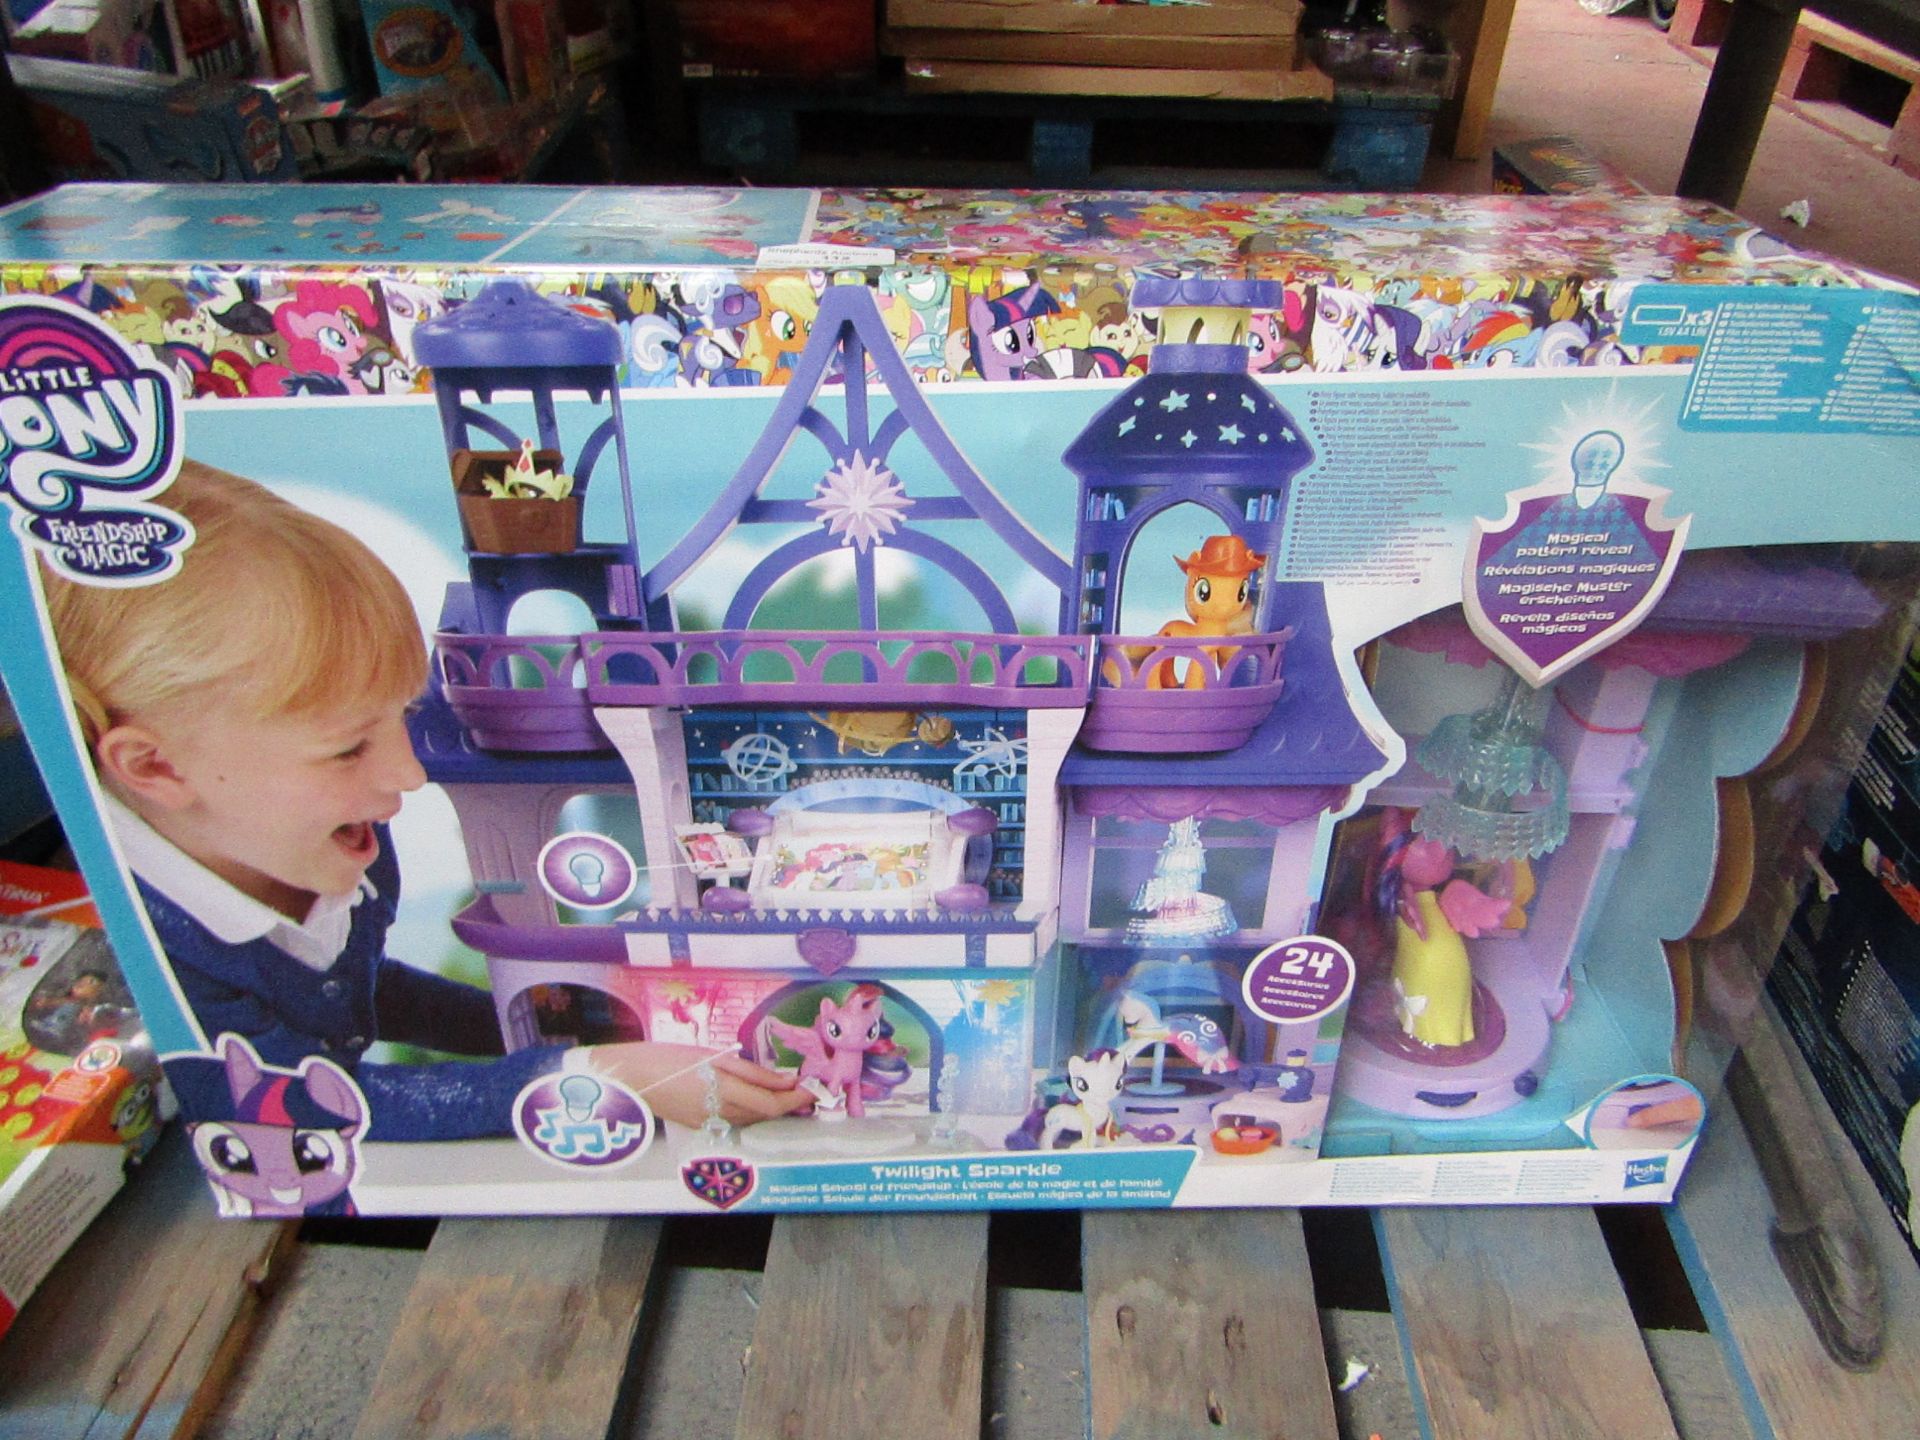 My Little Pony twlight sparkle set, unchecked and boxed.